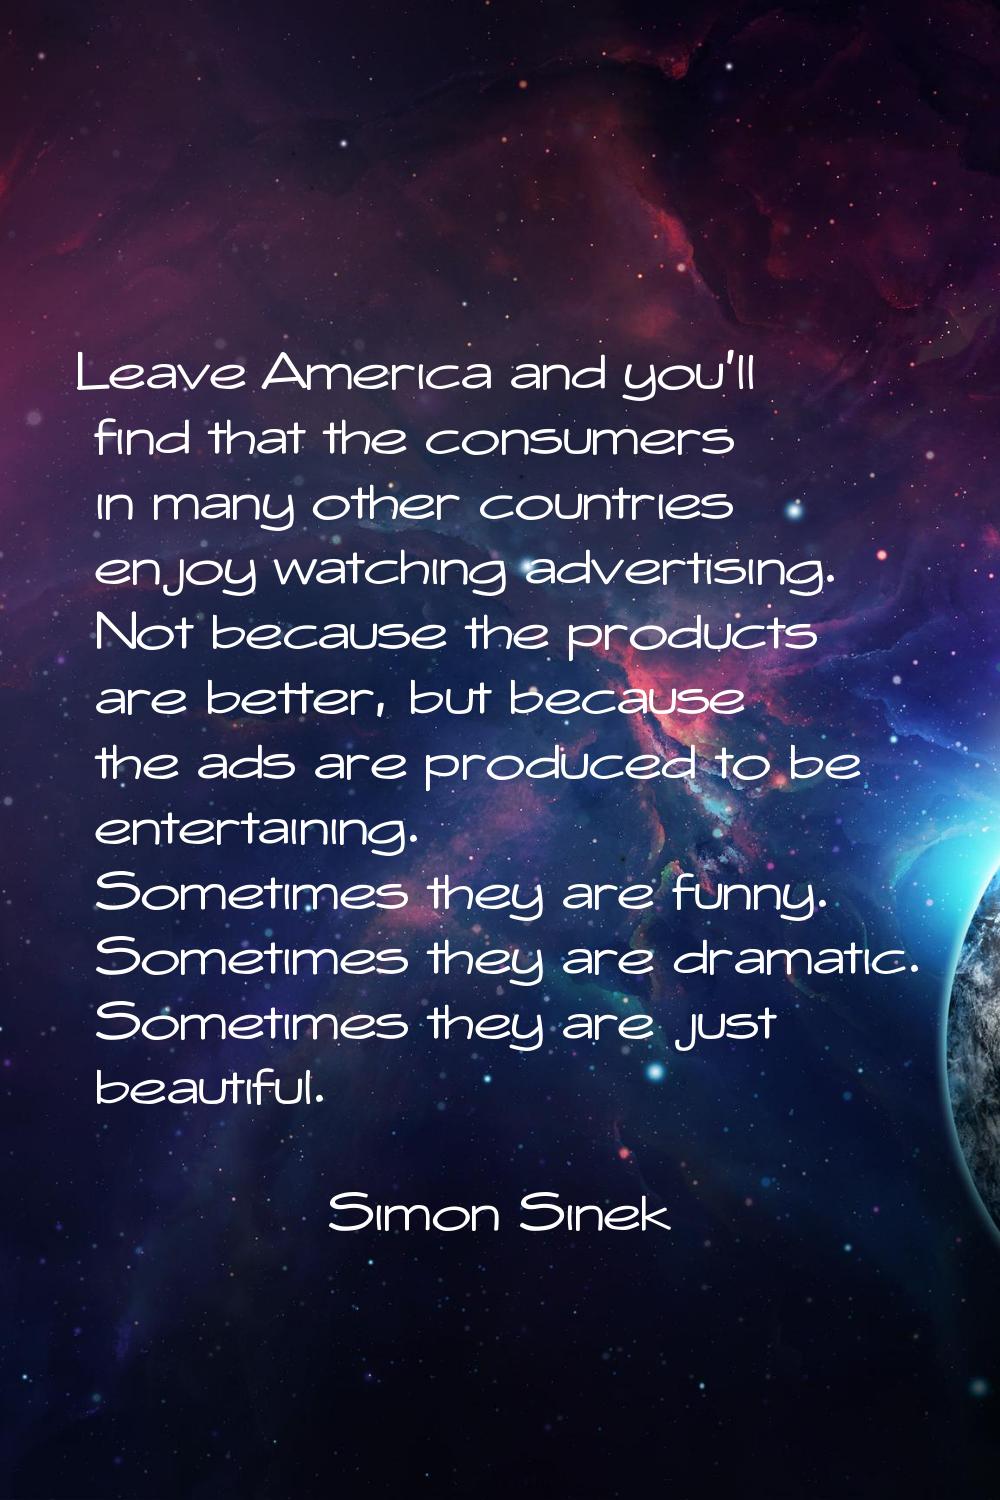 Leave America and you'll find that the consumers in many other countries enjoy watching advertising